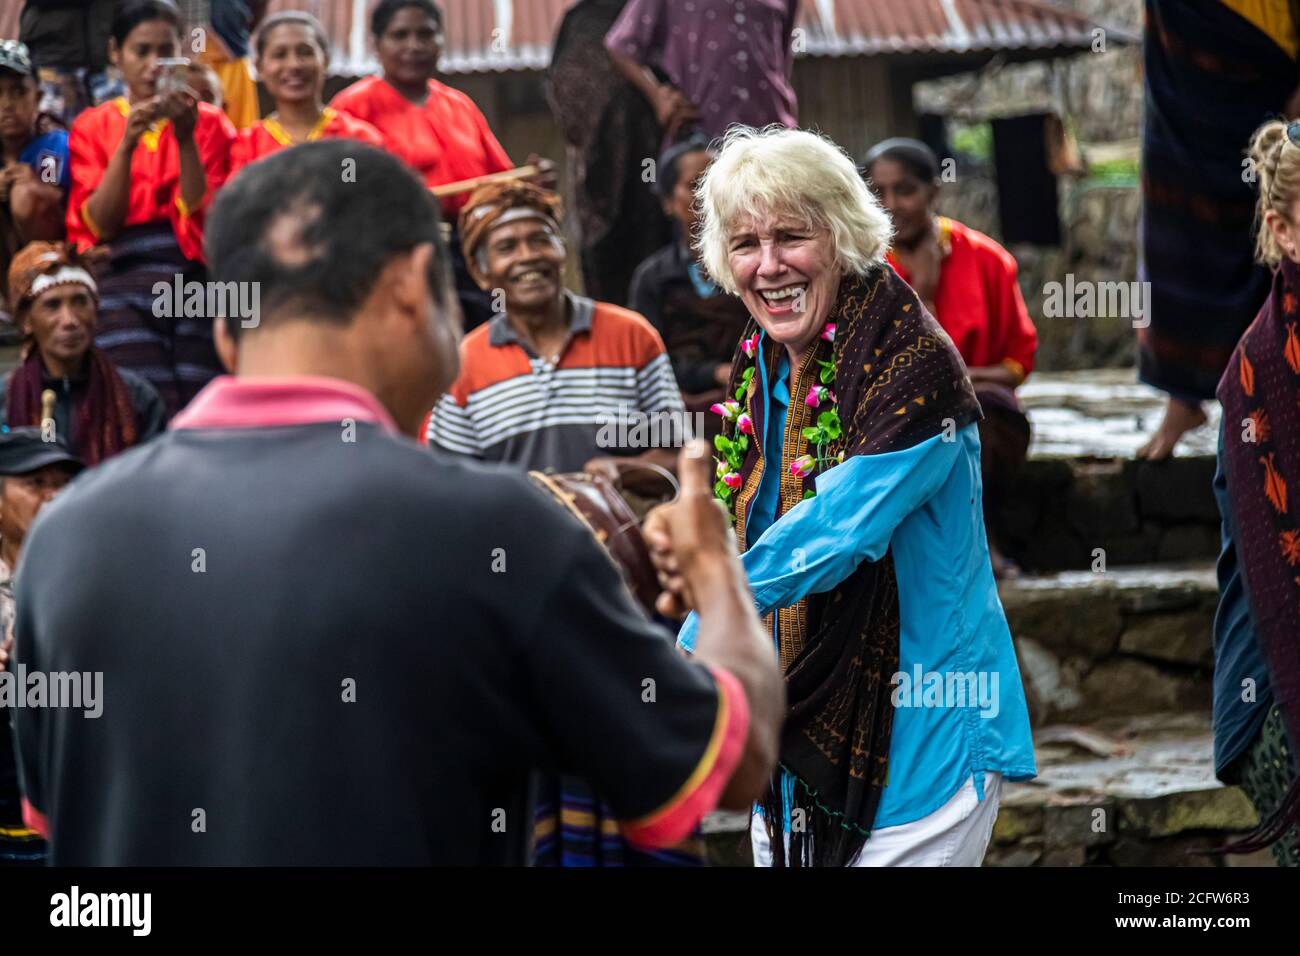 Indonesian People in traditional attire meeting with tourists Stock Photo